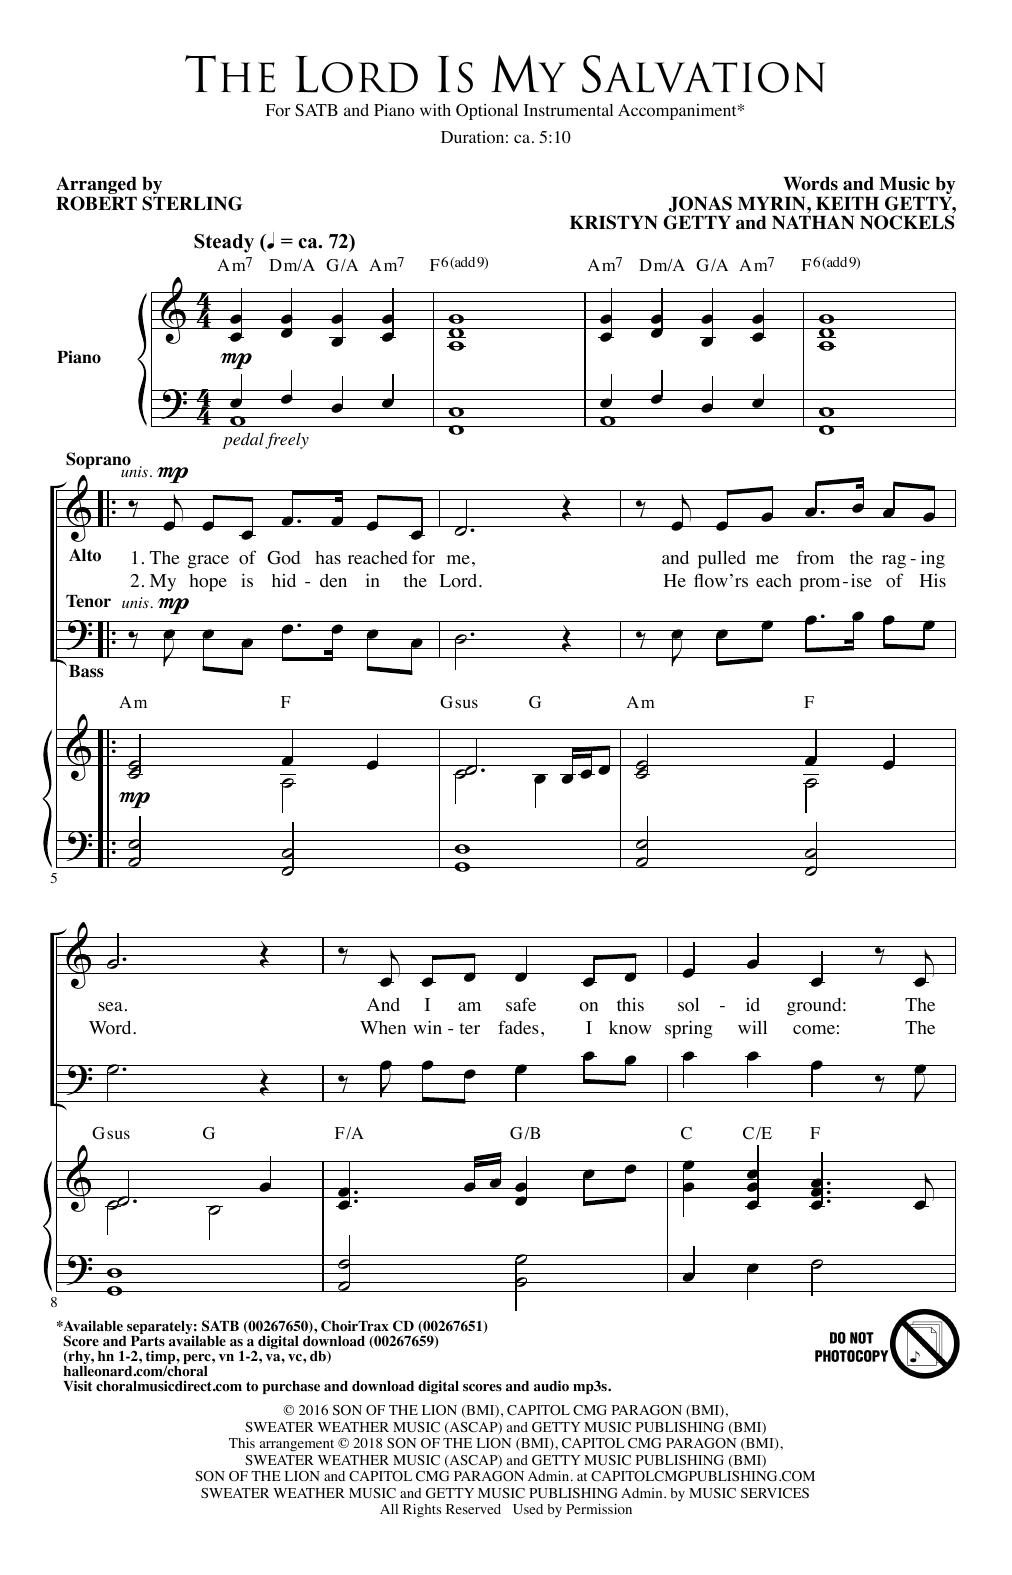 Download Robert Sterling The Lord Is My Salvation Sheet Music